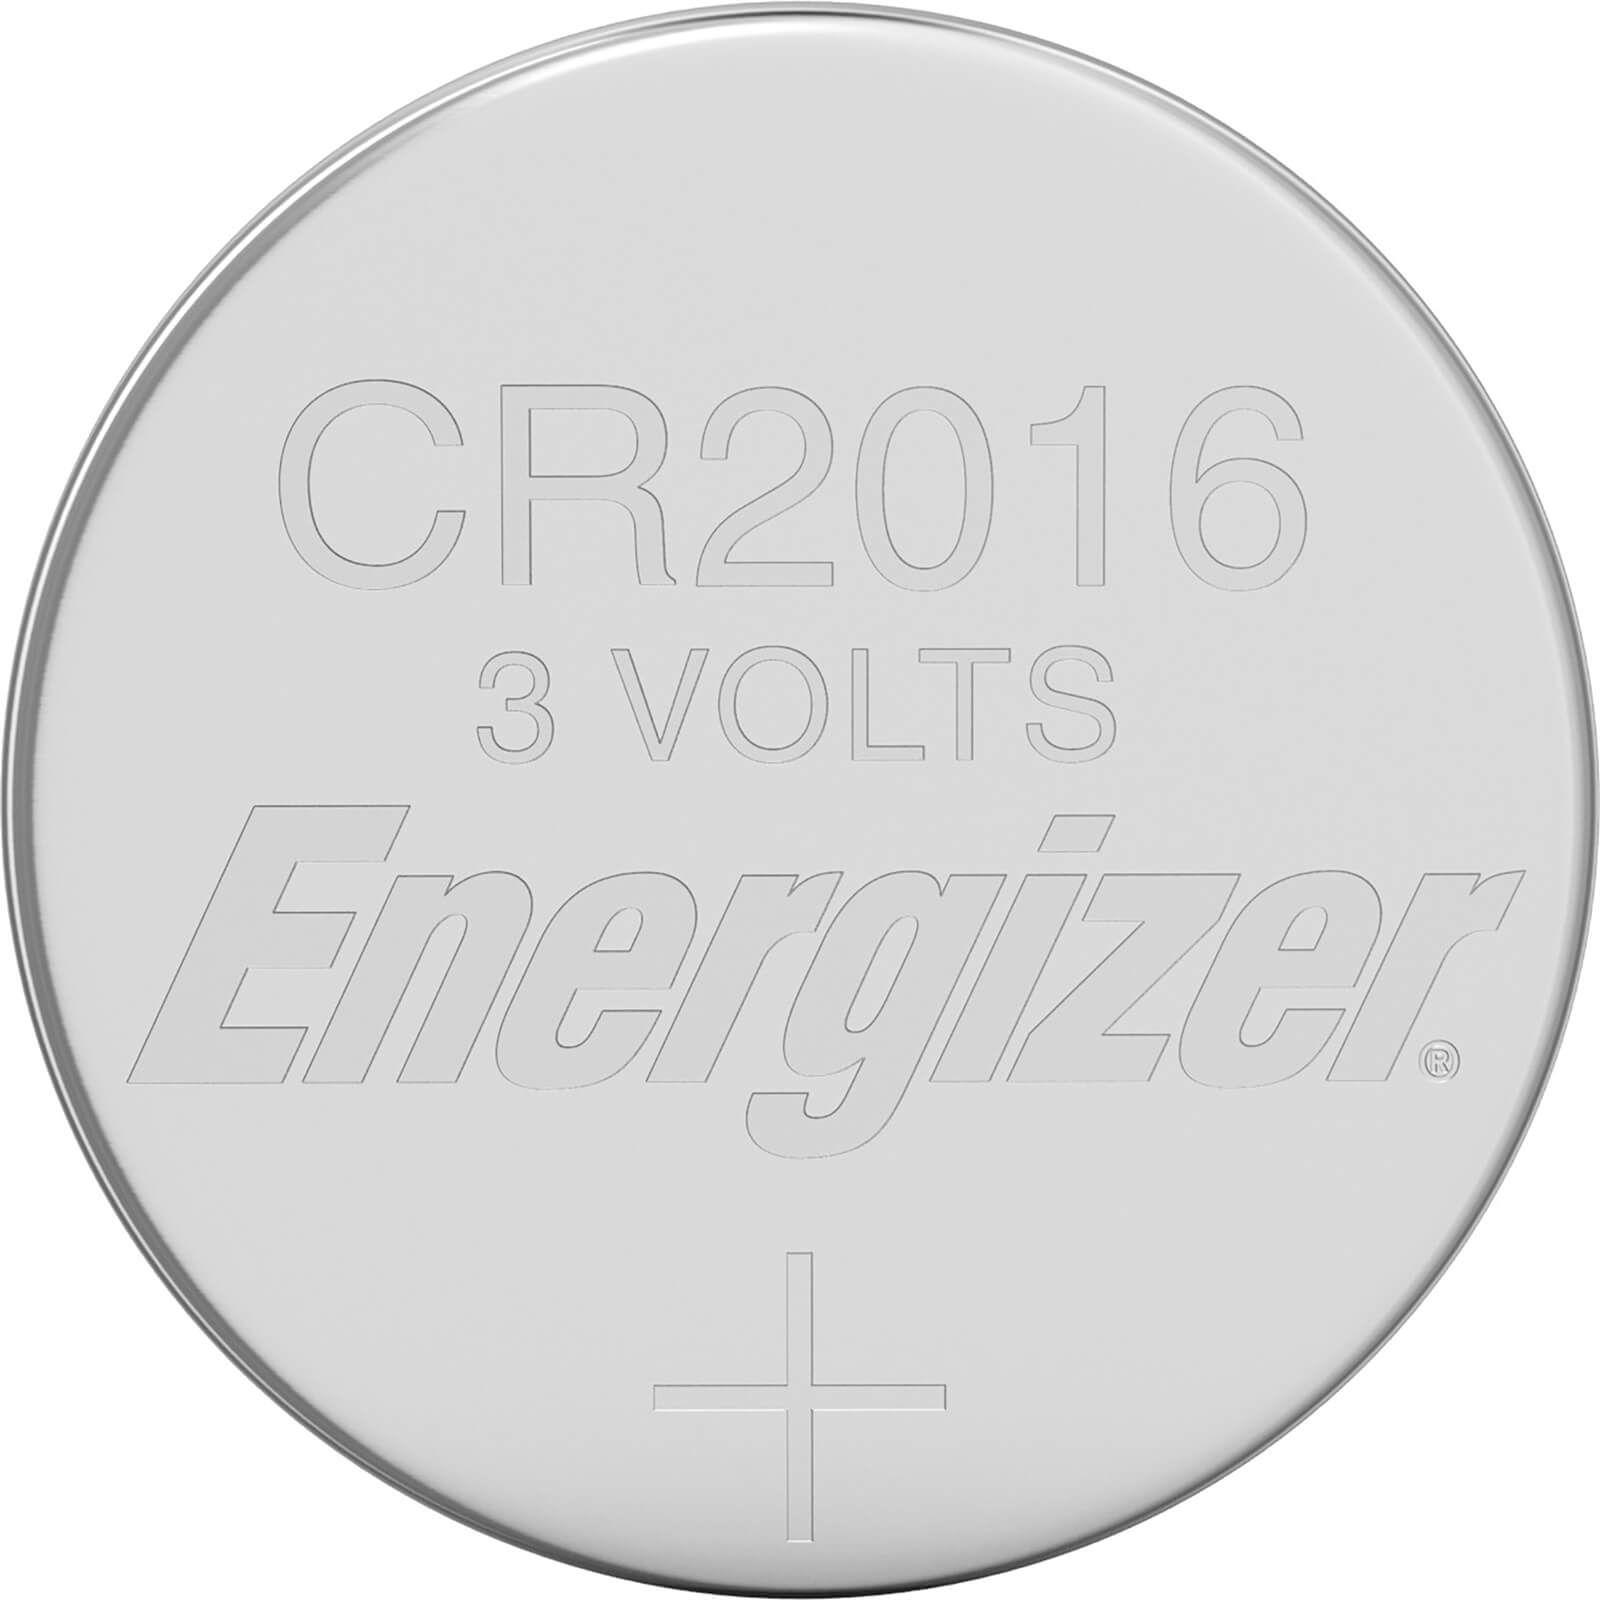 Energizer 2016 Lithium Coin Battery - 4 Pack